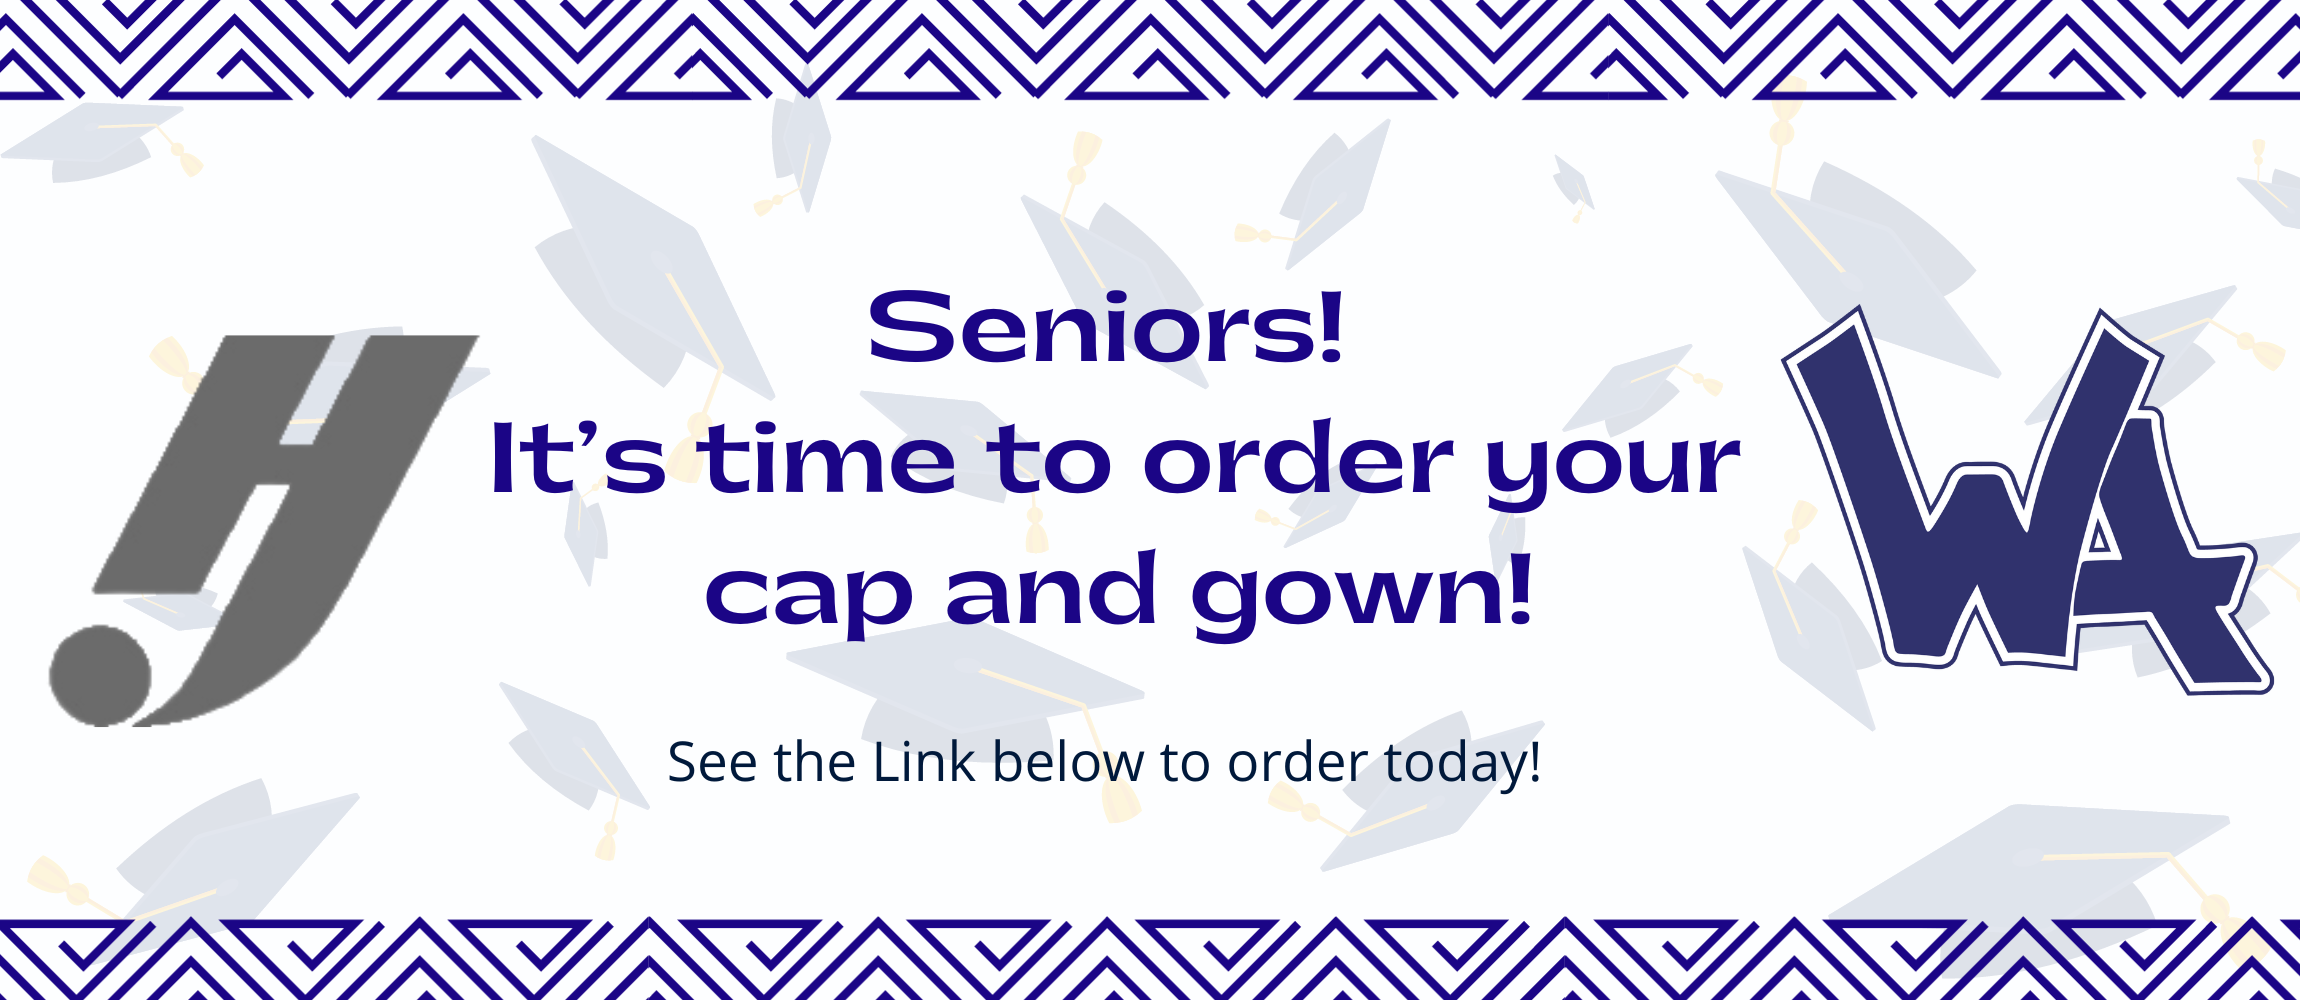 Seniors, order your cap and gown today!